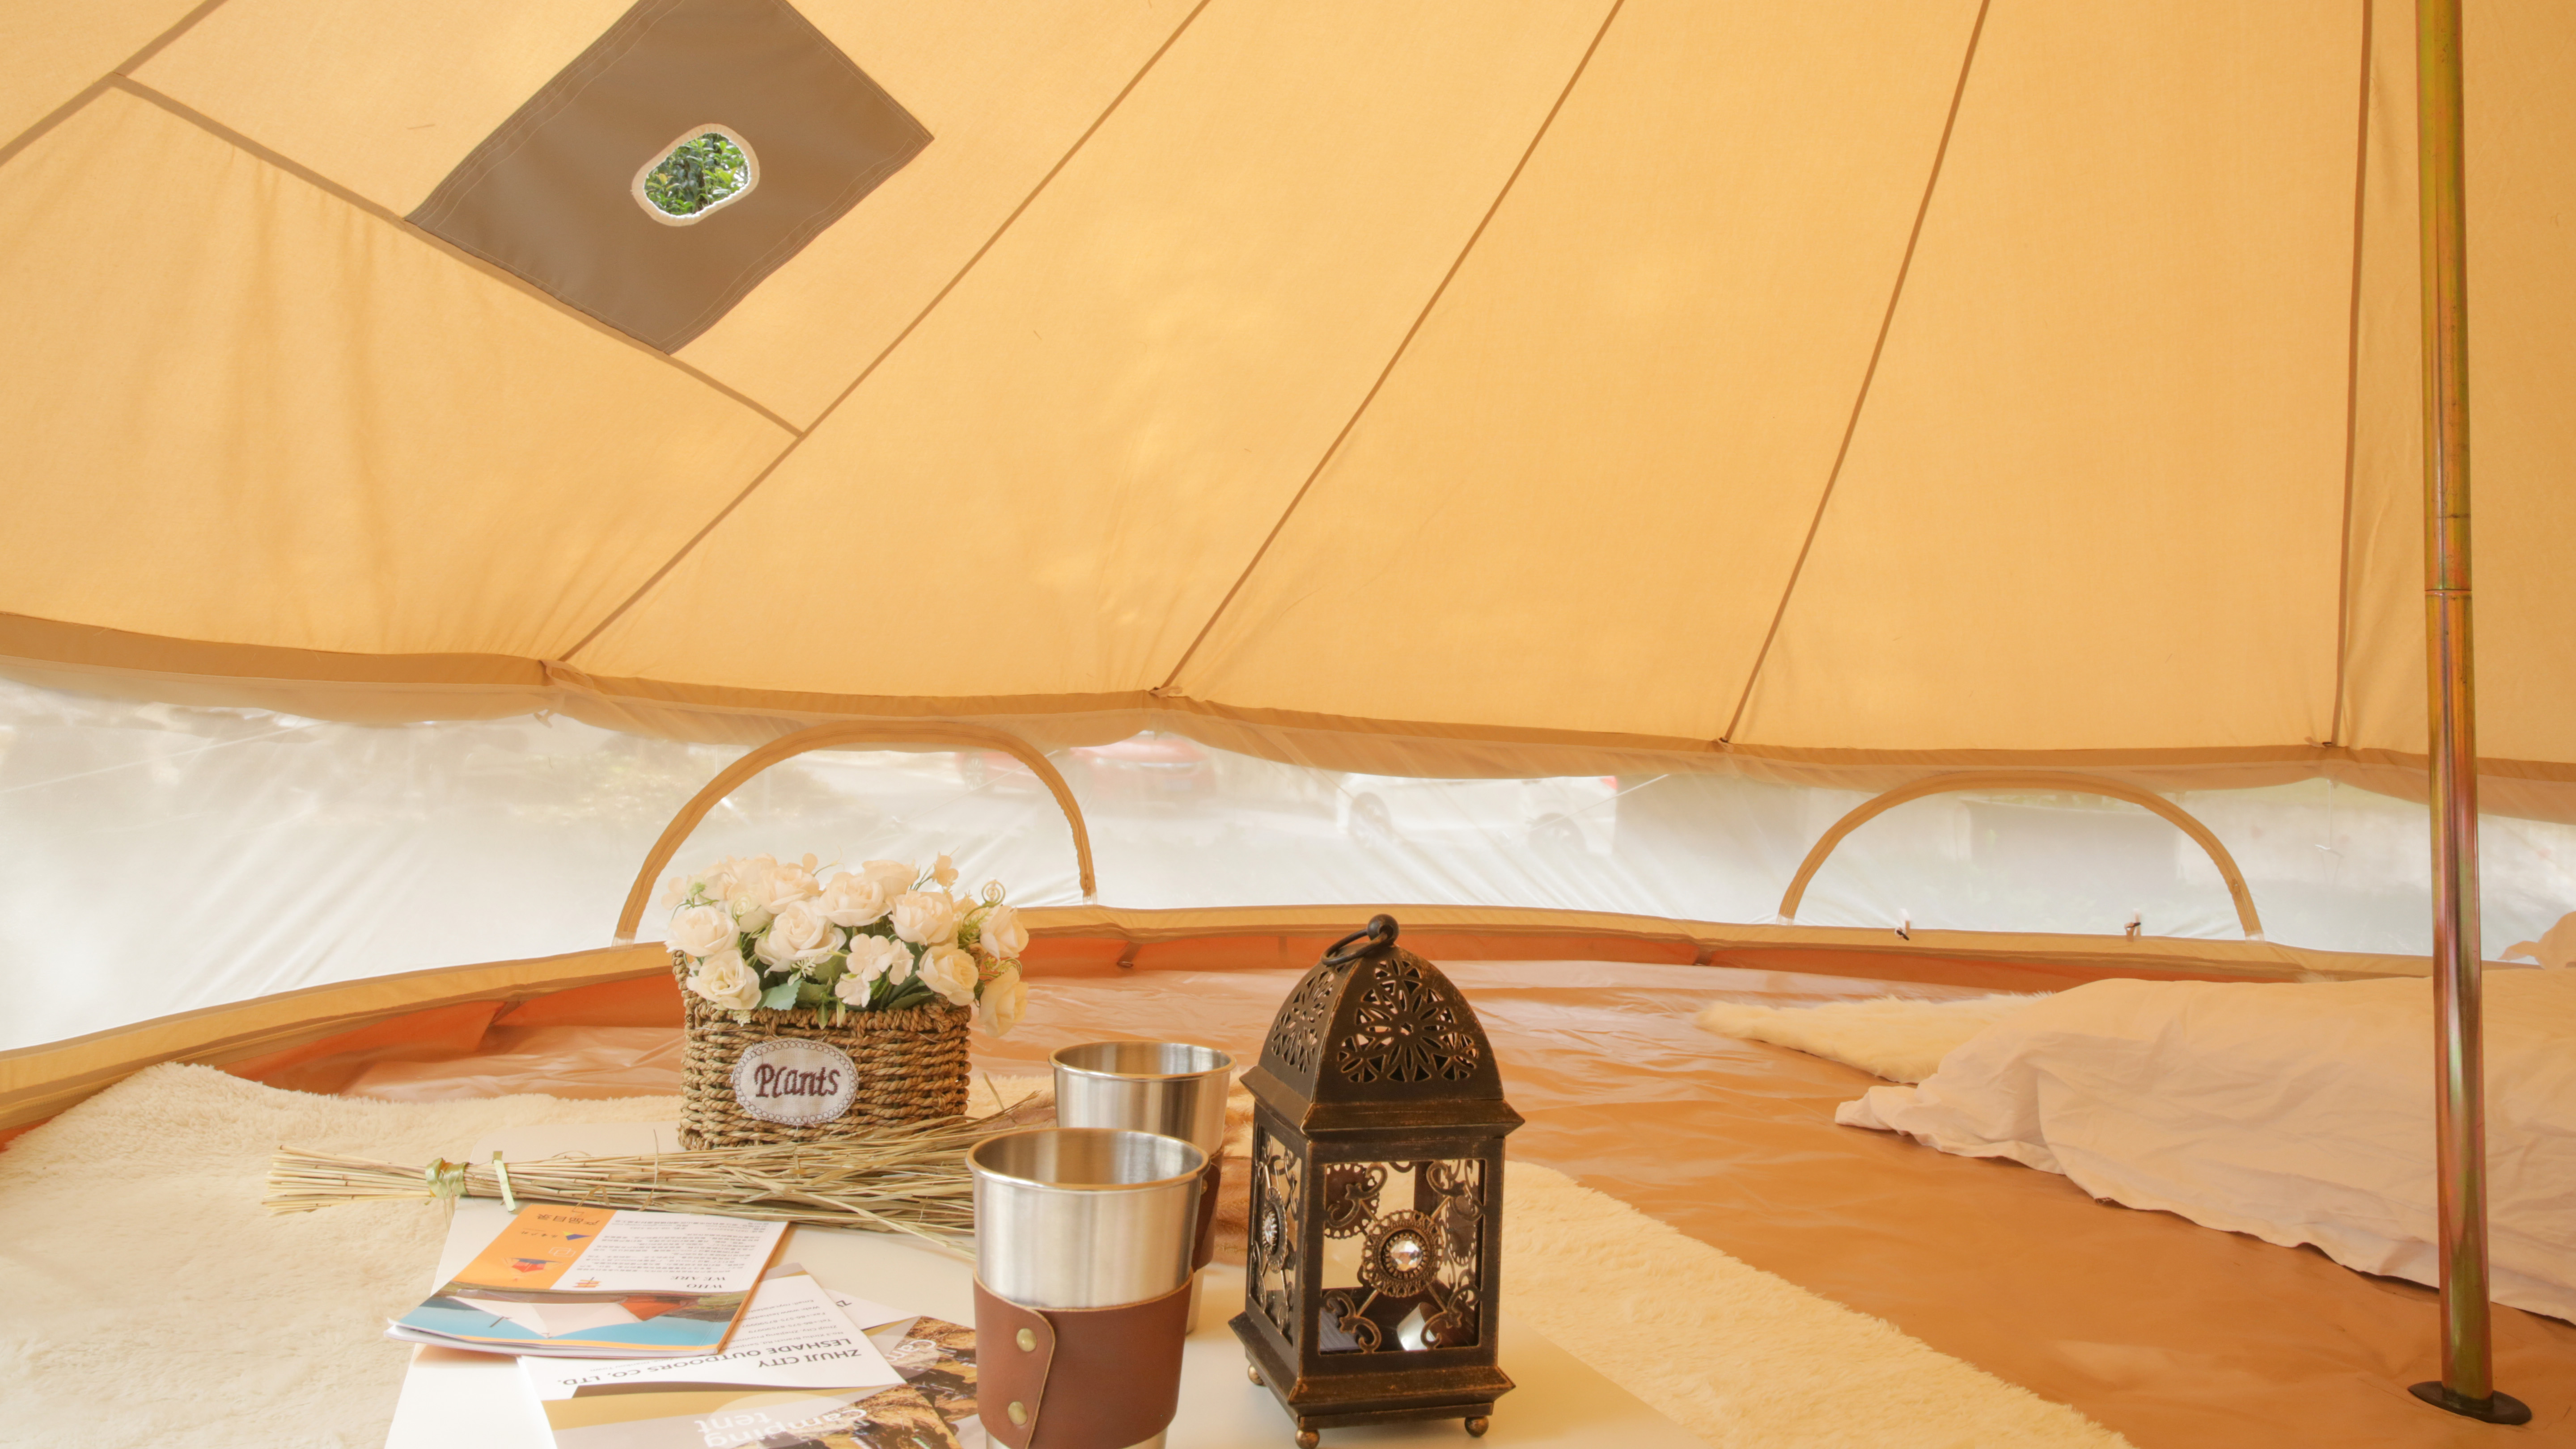 Outdoor Equipment Retailer: How to Choose the Tents That Suit Your Customers